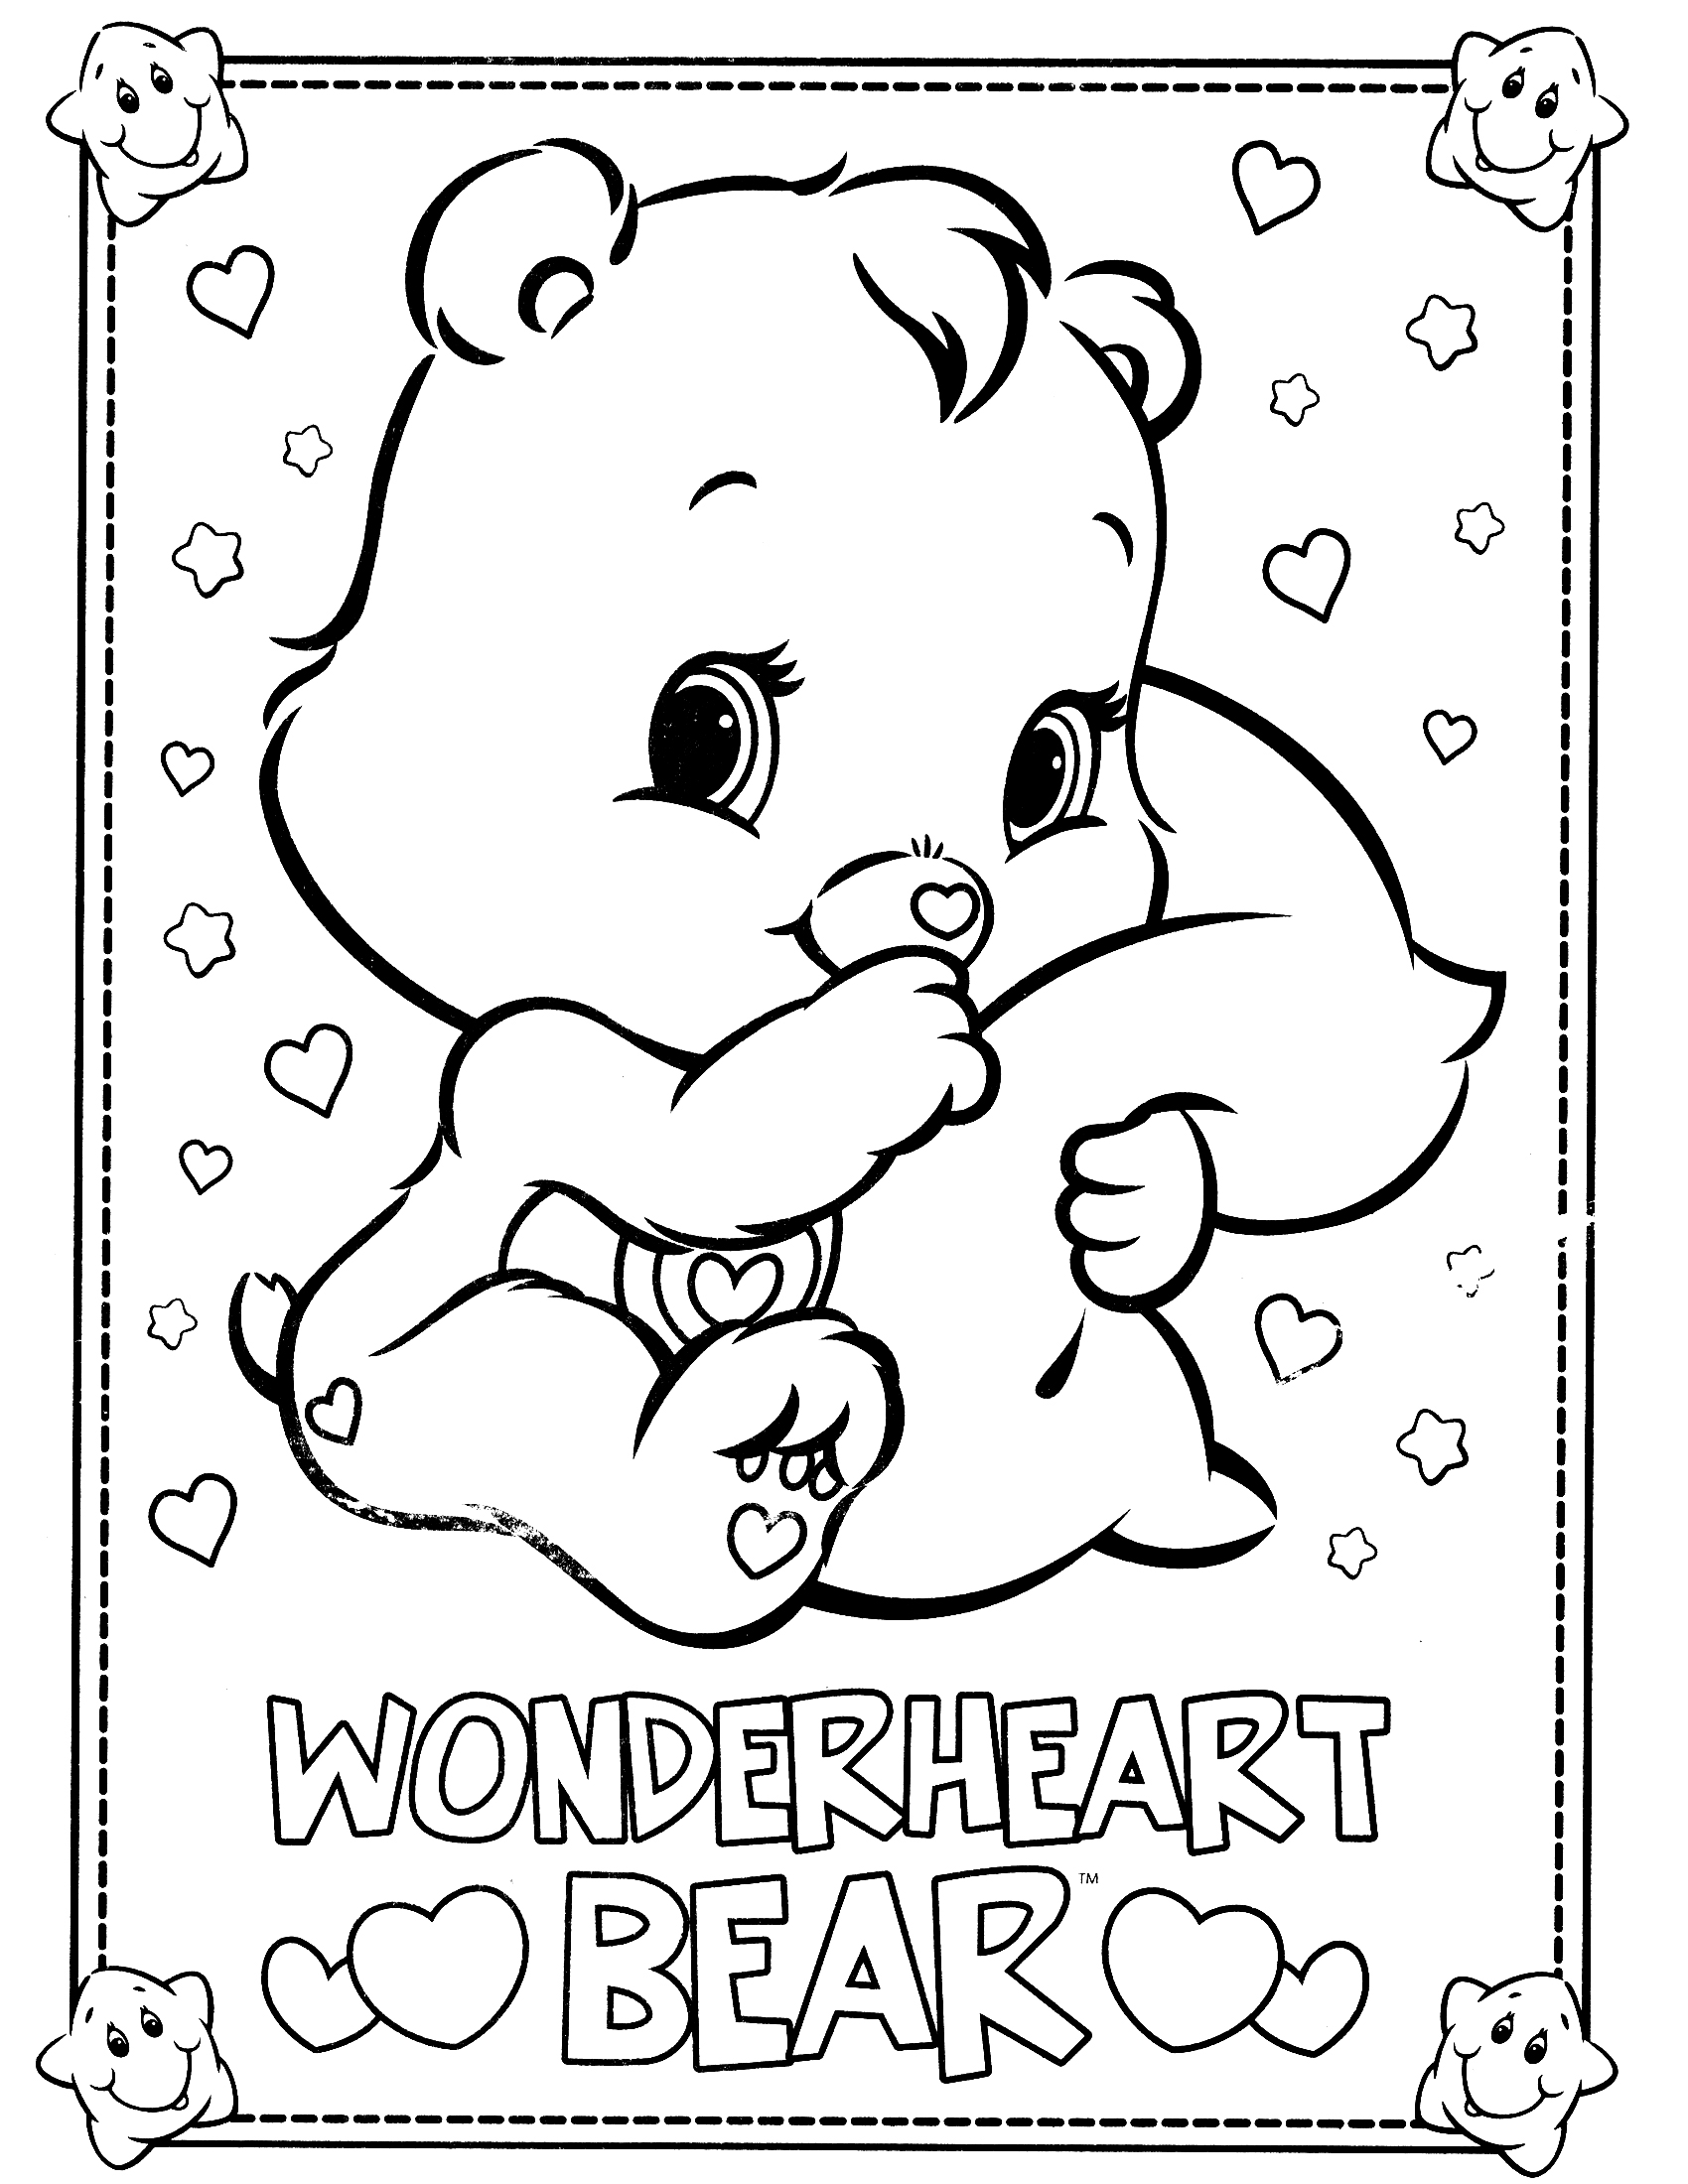 Drawing Care Bears 20 Cartoons – Printable coloring pages